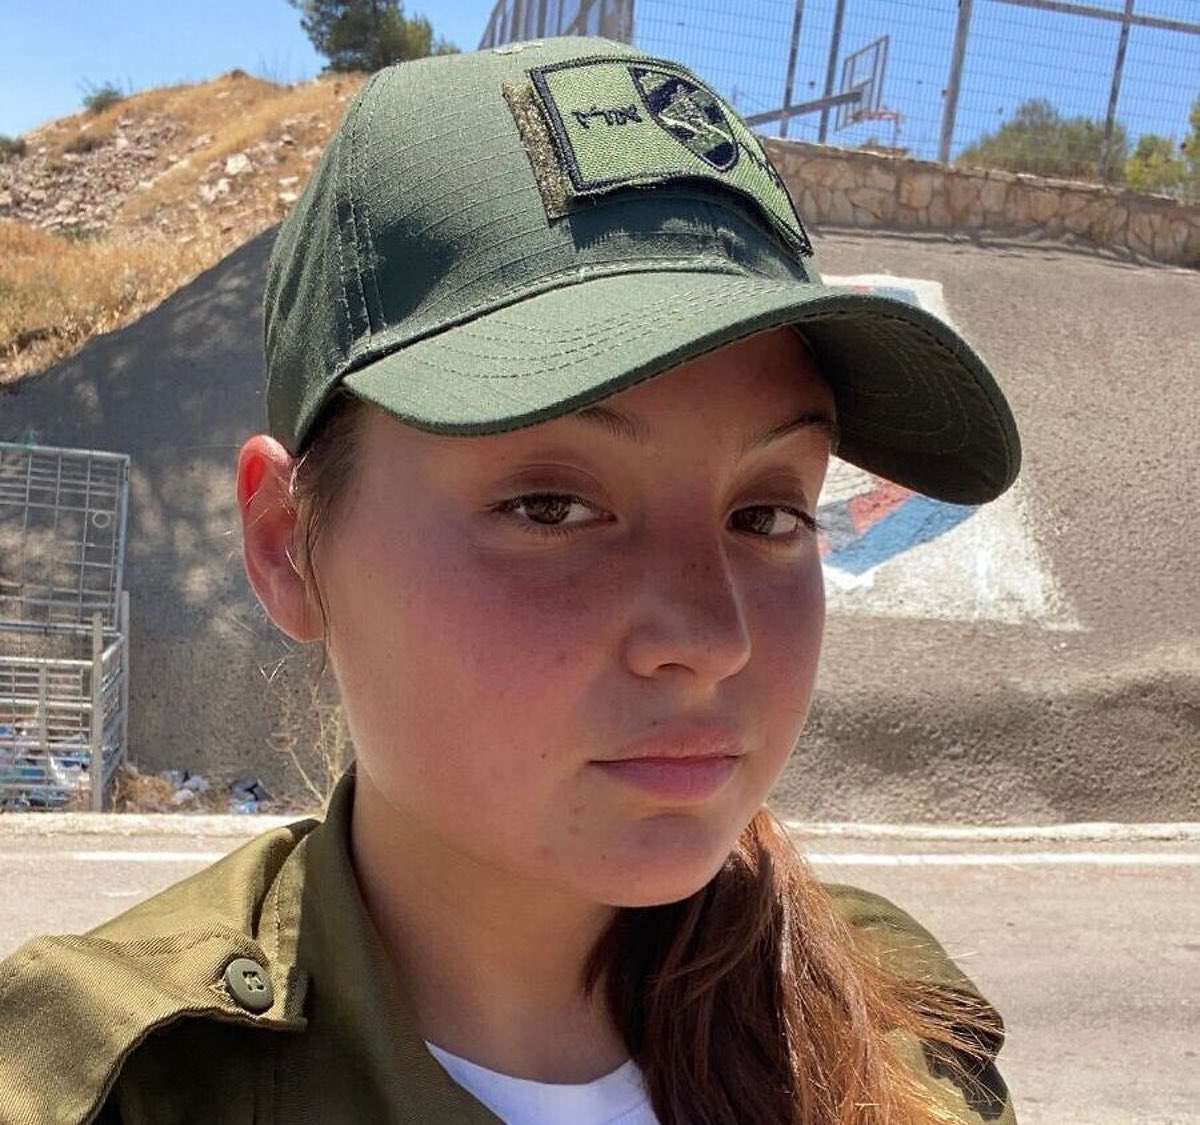 Sgt. Noa Lazar, an 18-year old member of the Israeli Military Police’s Erez battalion, was killed in a shooting attack at the Shuafat checkpoint in eastern Jerusalem on October 8, 2022. Credit: Israel Defense Forces.